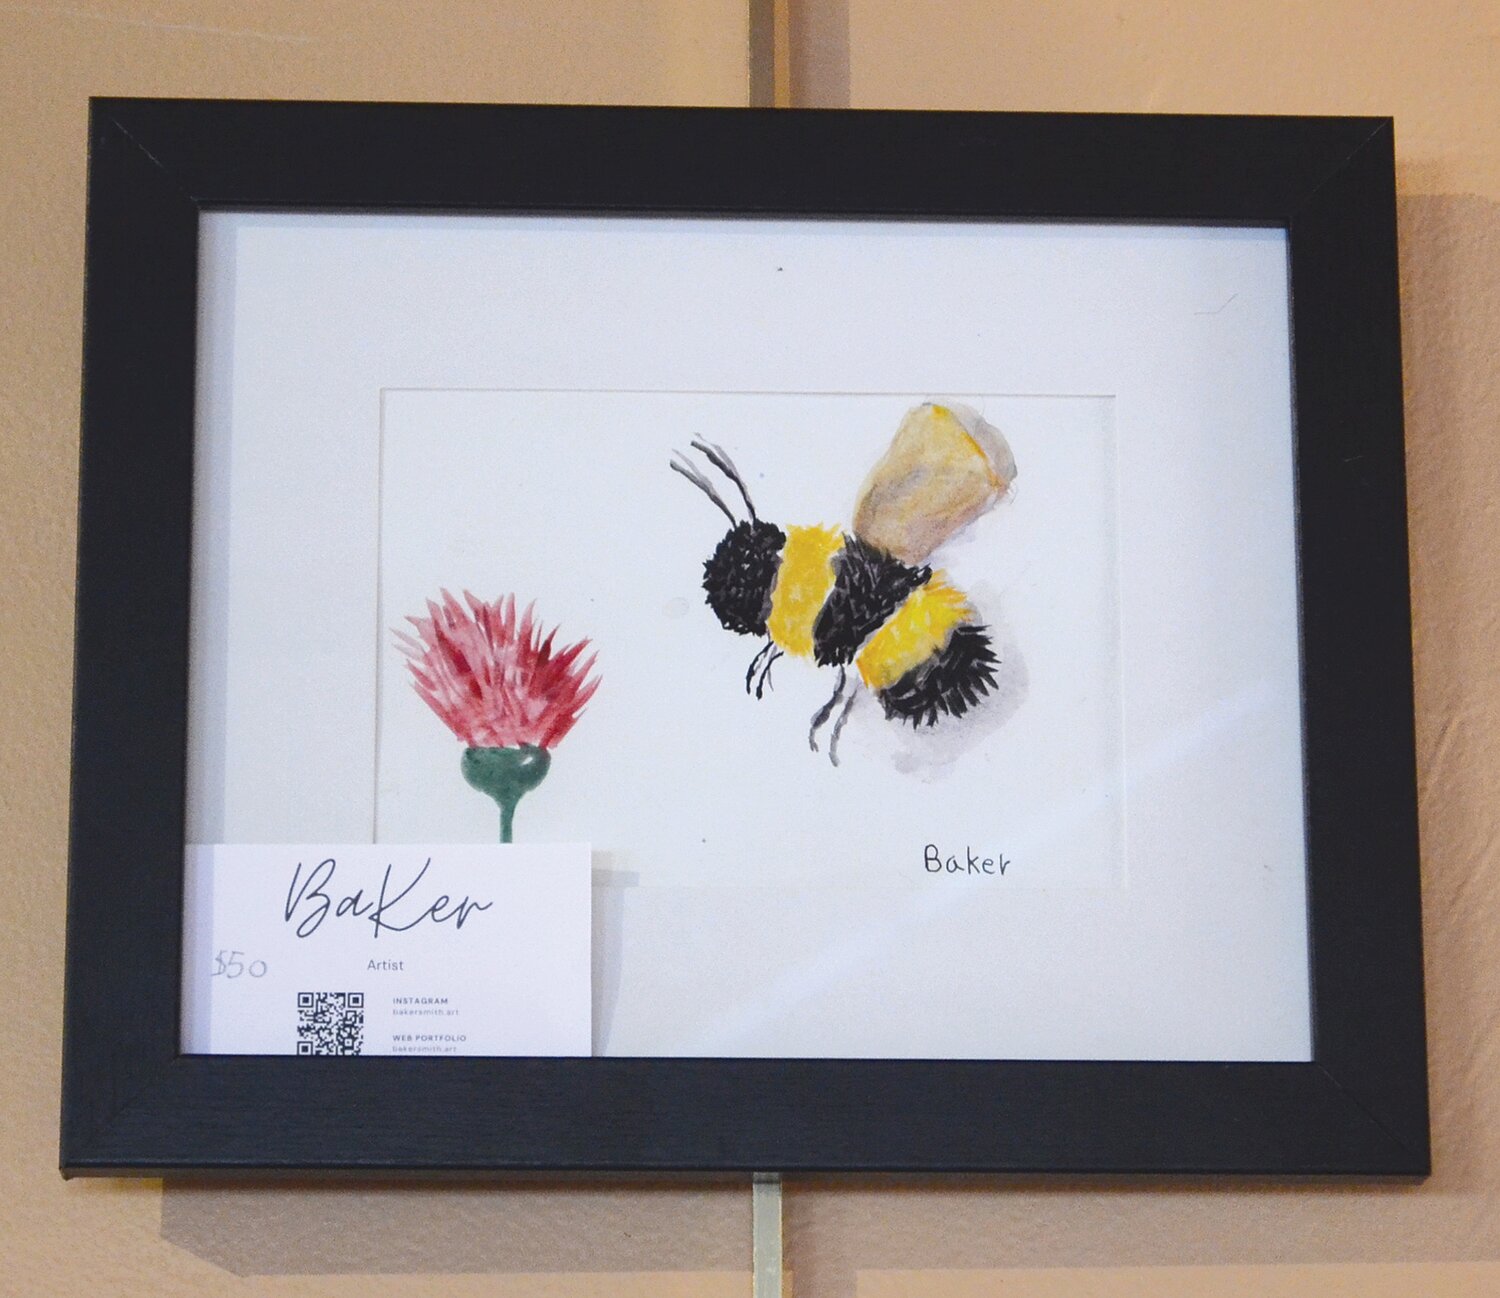 A bumblebee heads towards a flower in this piece.